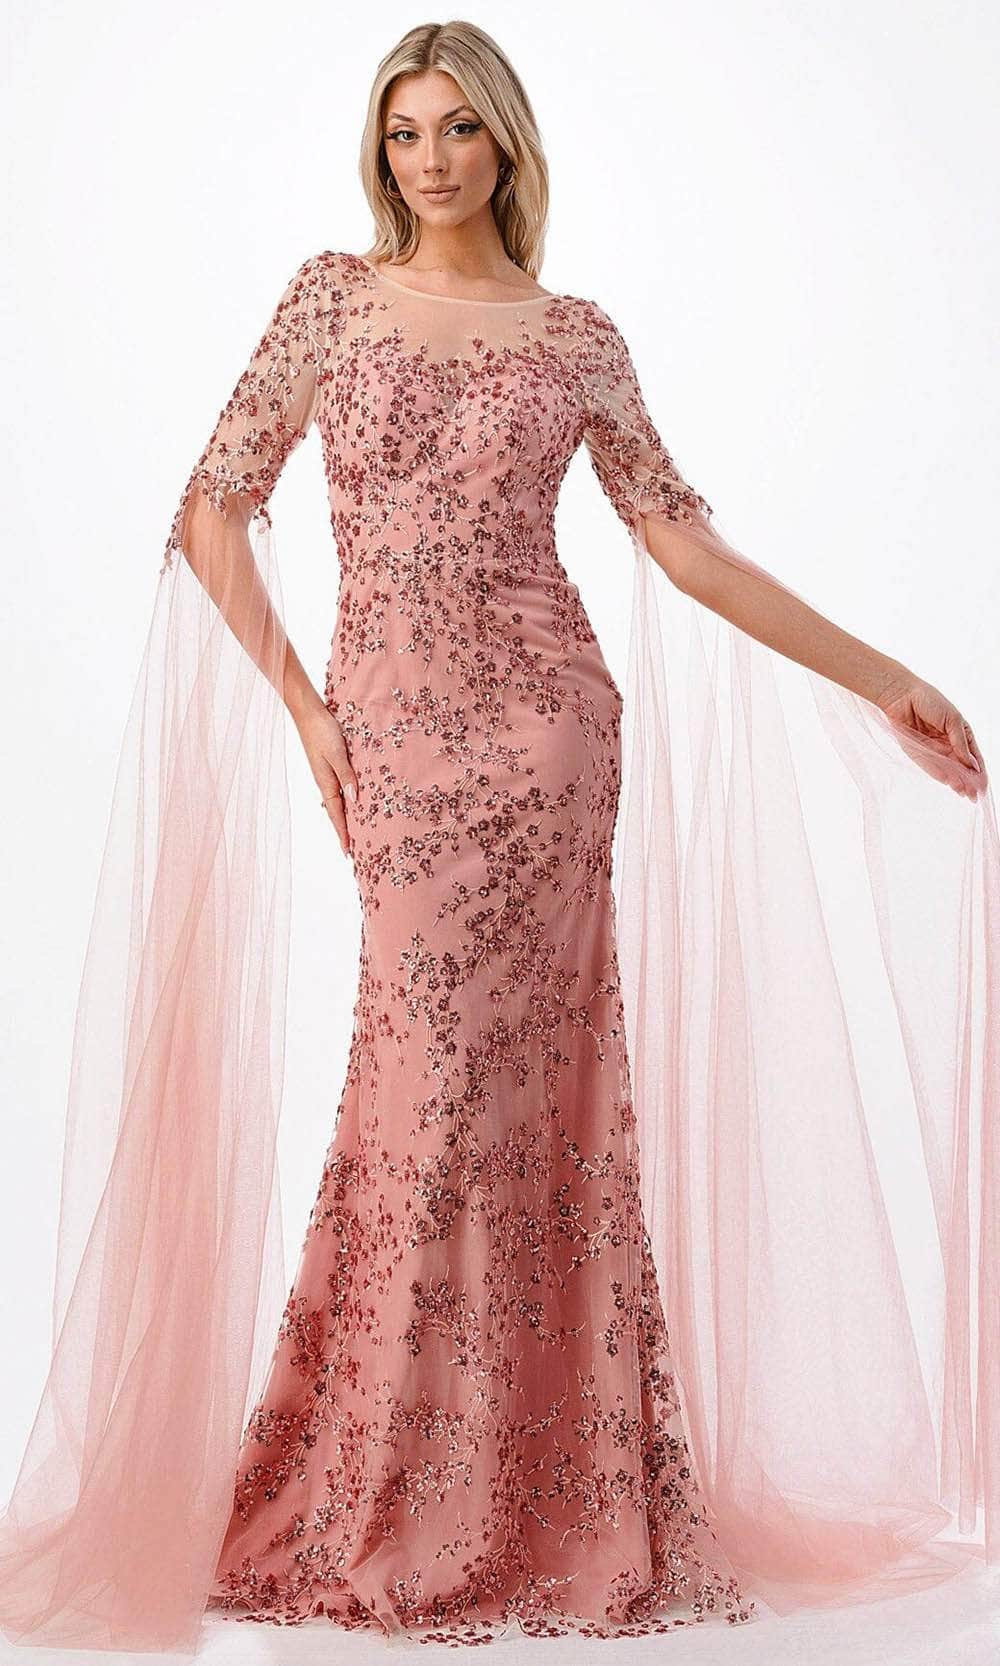 Image of Aspeed Design P2221 - Cape Sleeve Mermaid Evening Gown